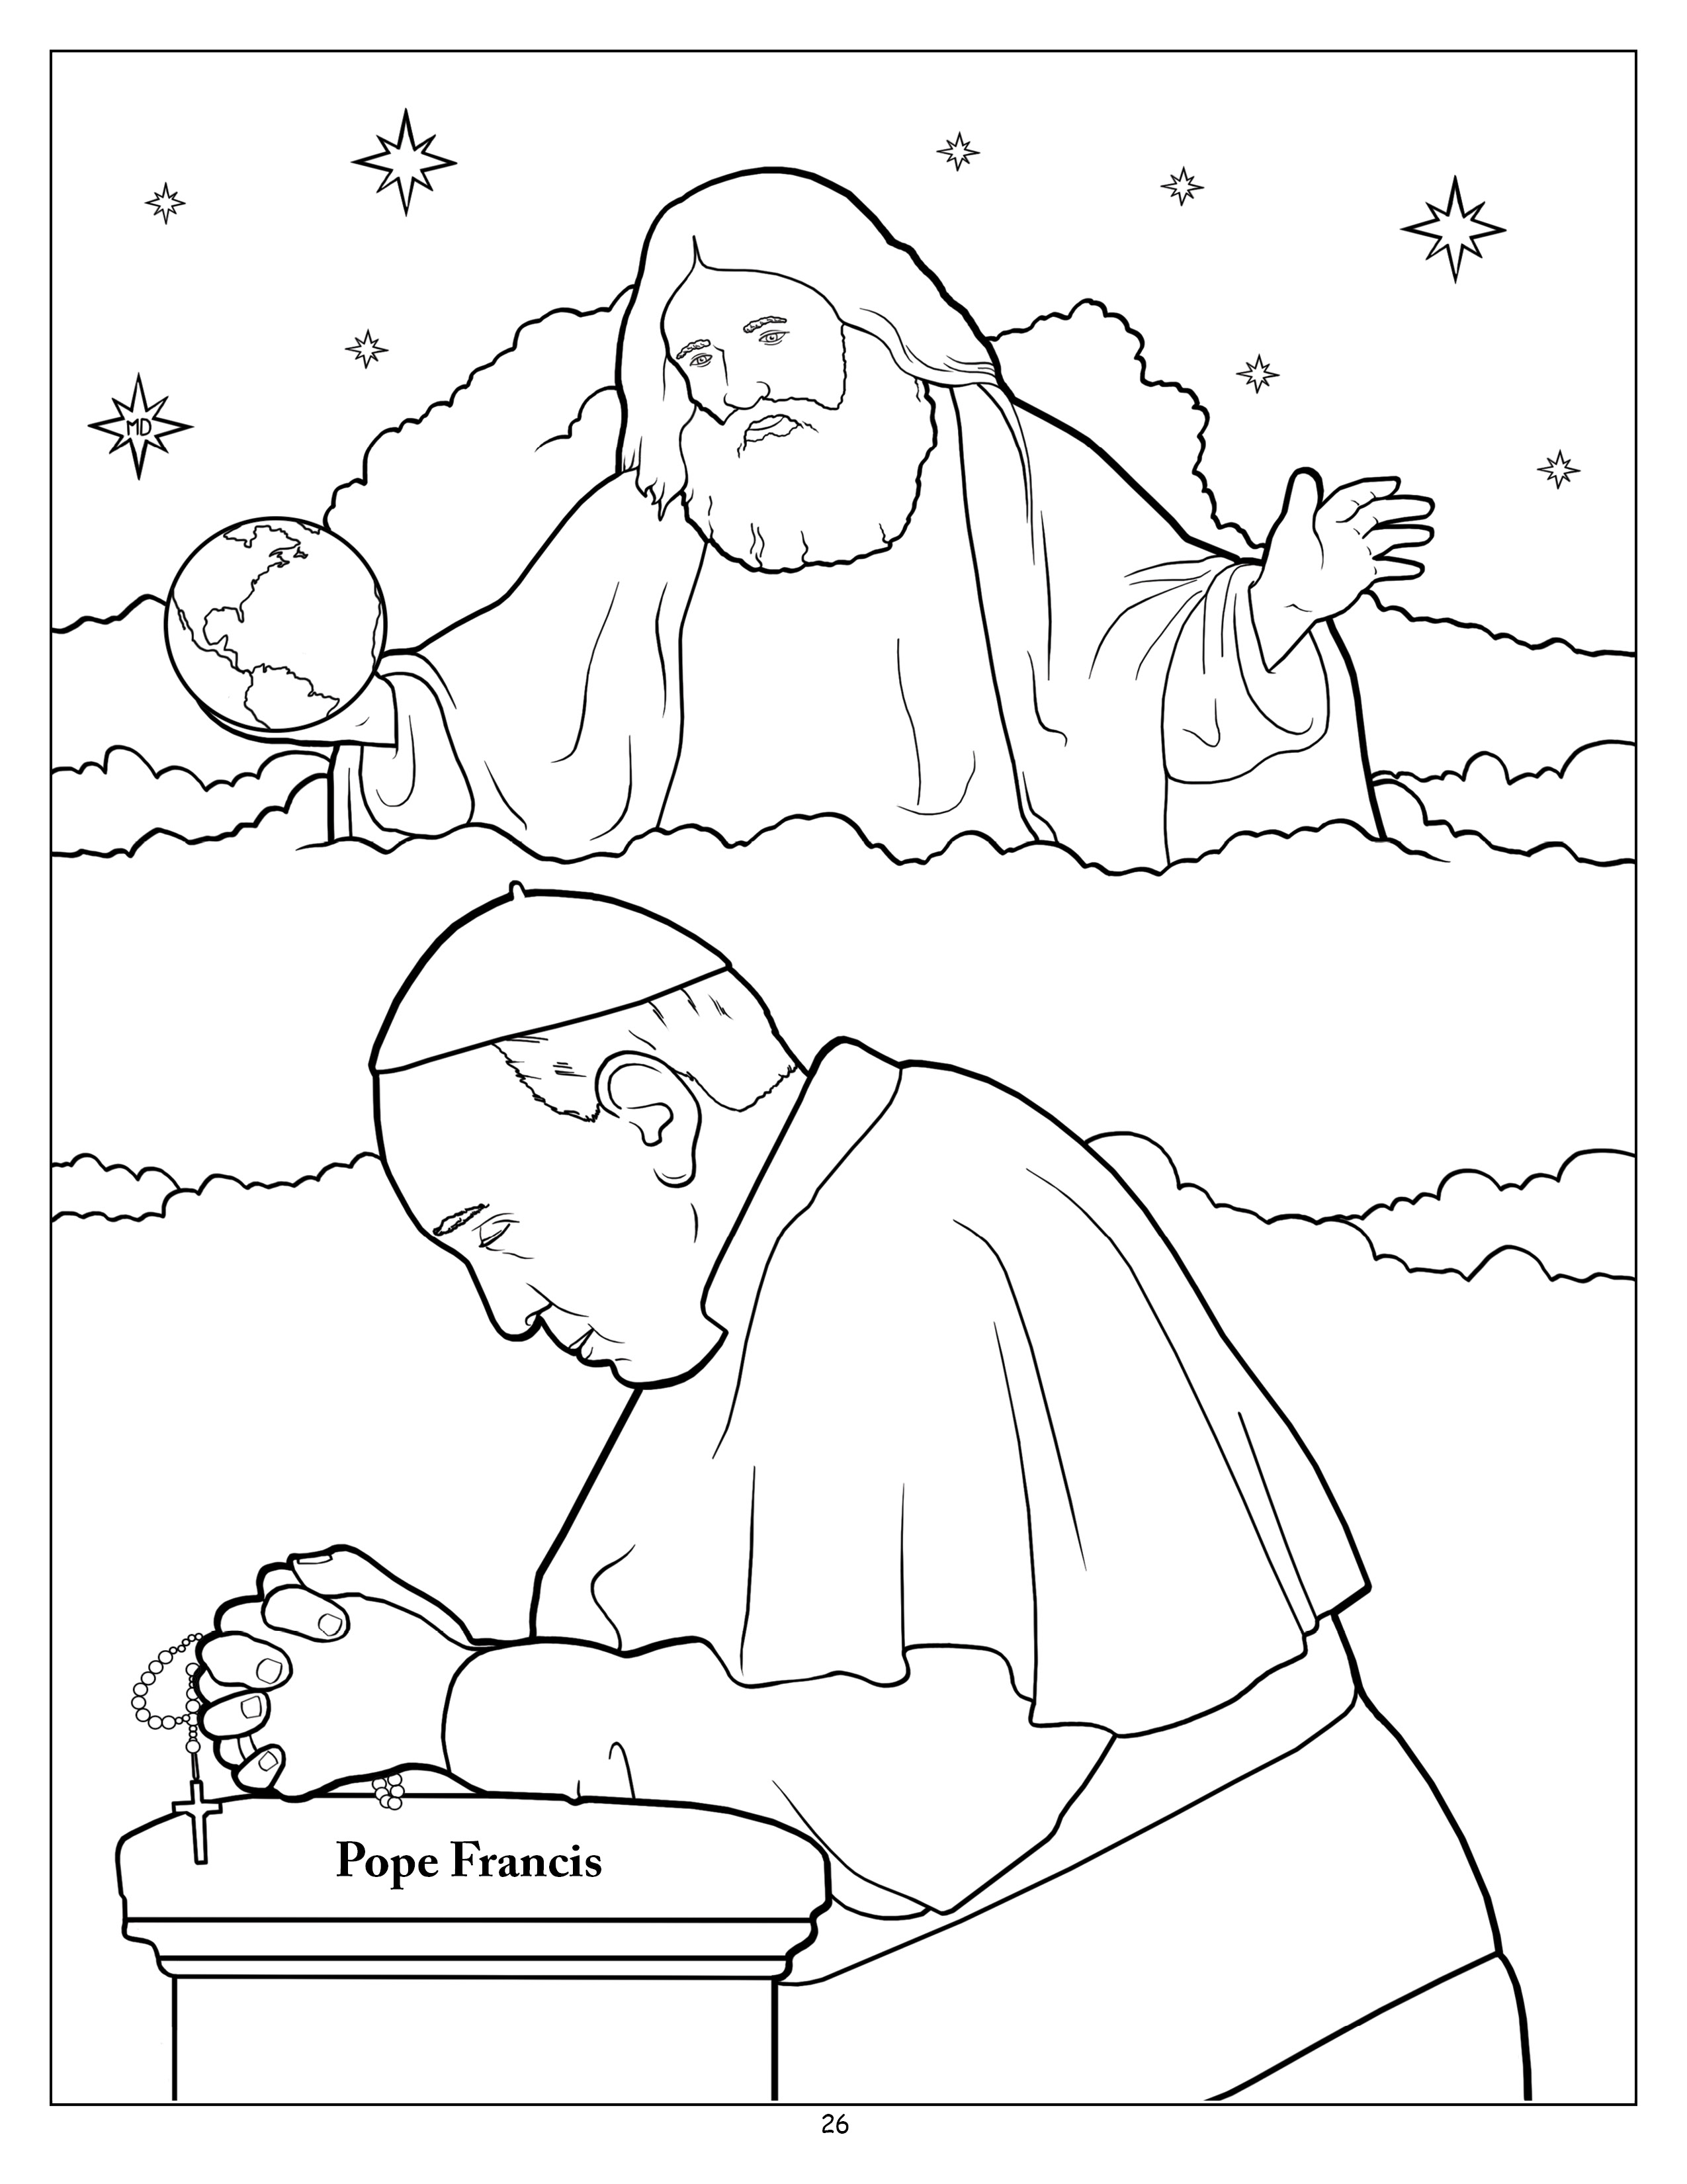 saint pope john paul ii coloring pages - photo #18